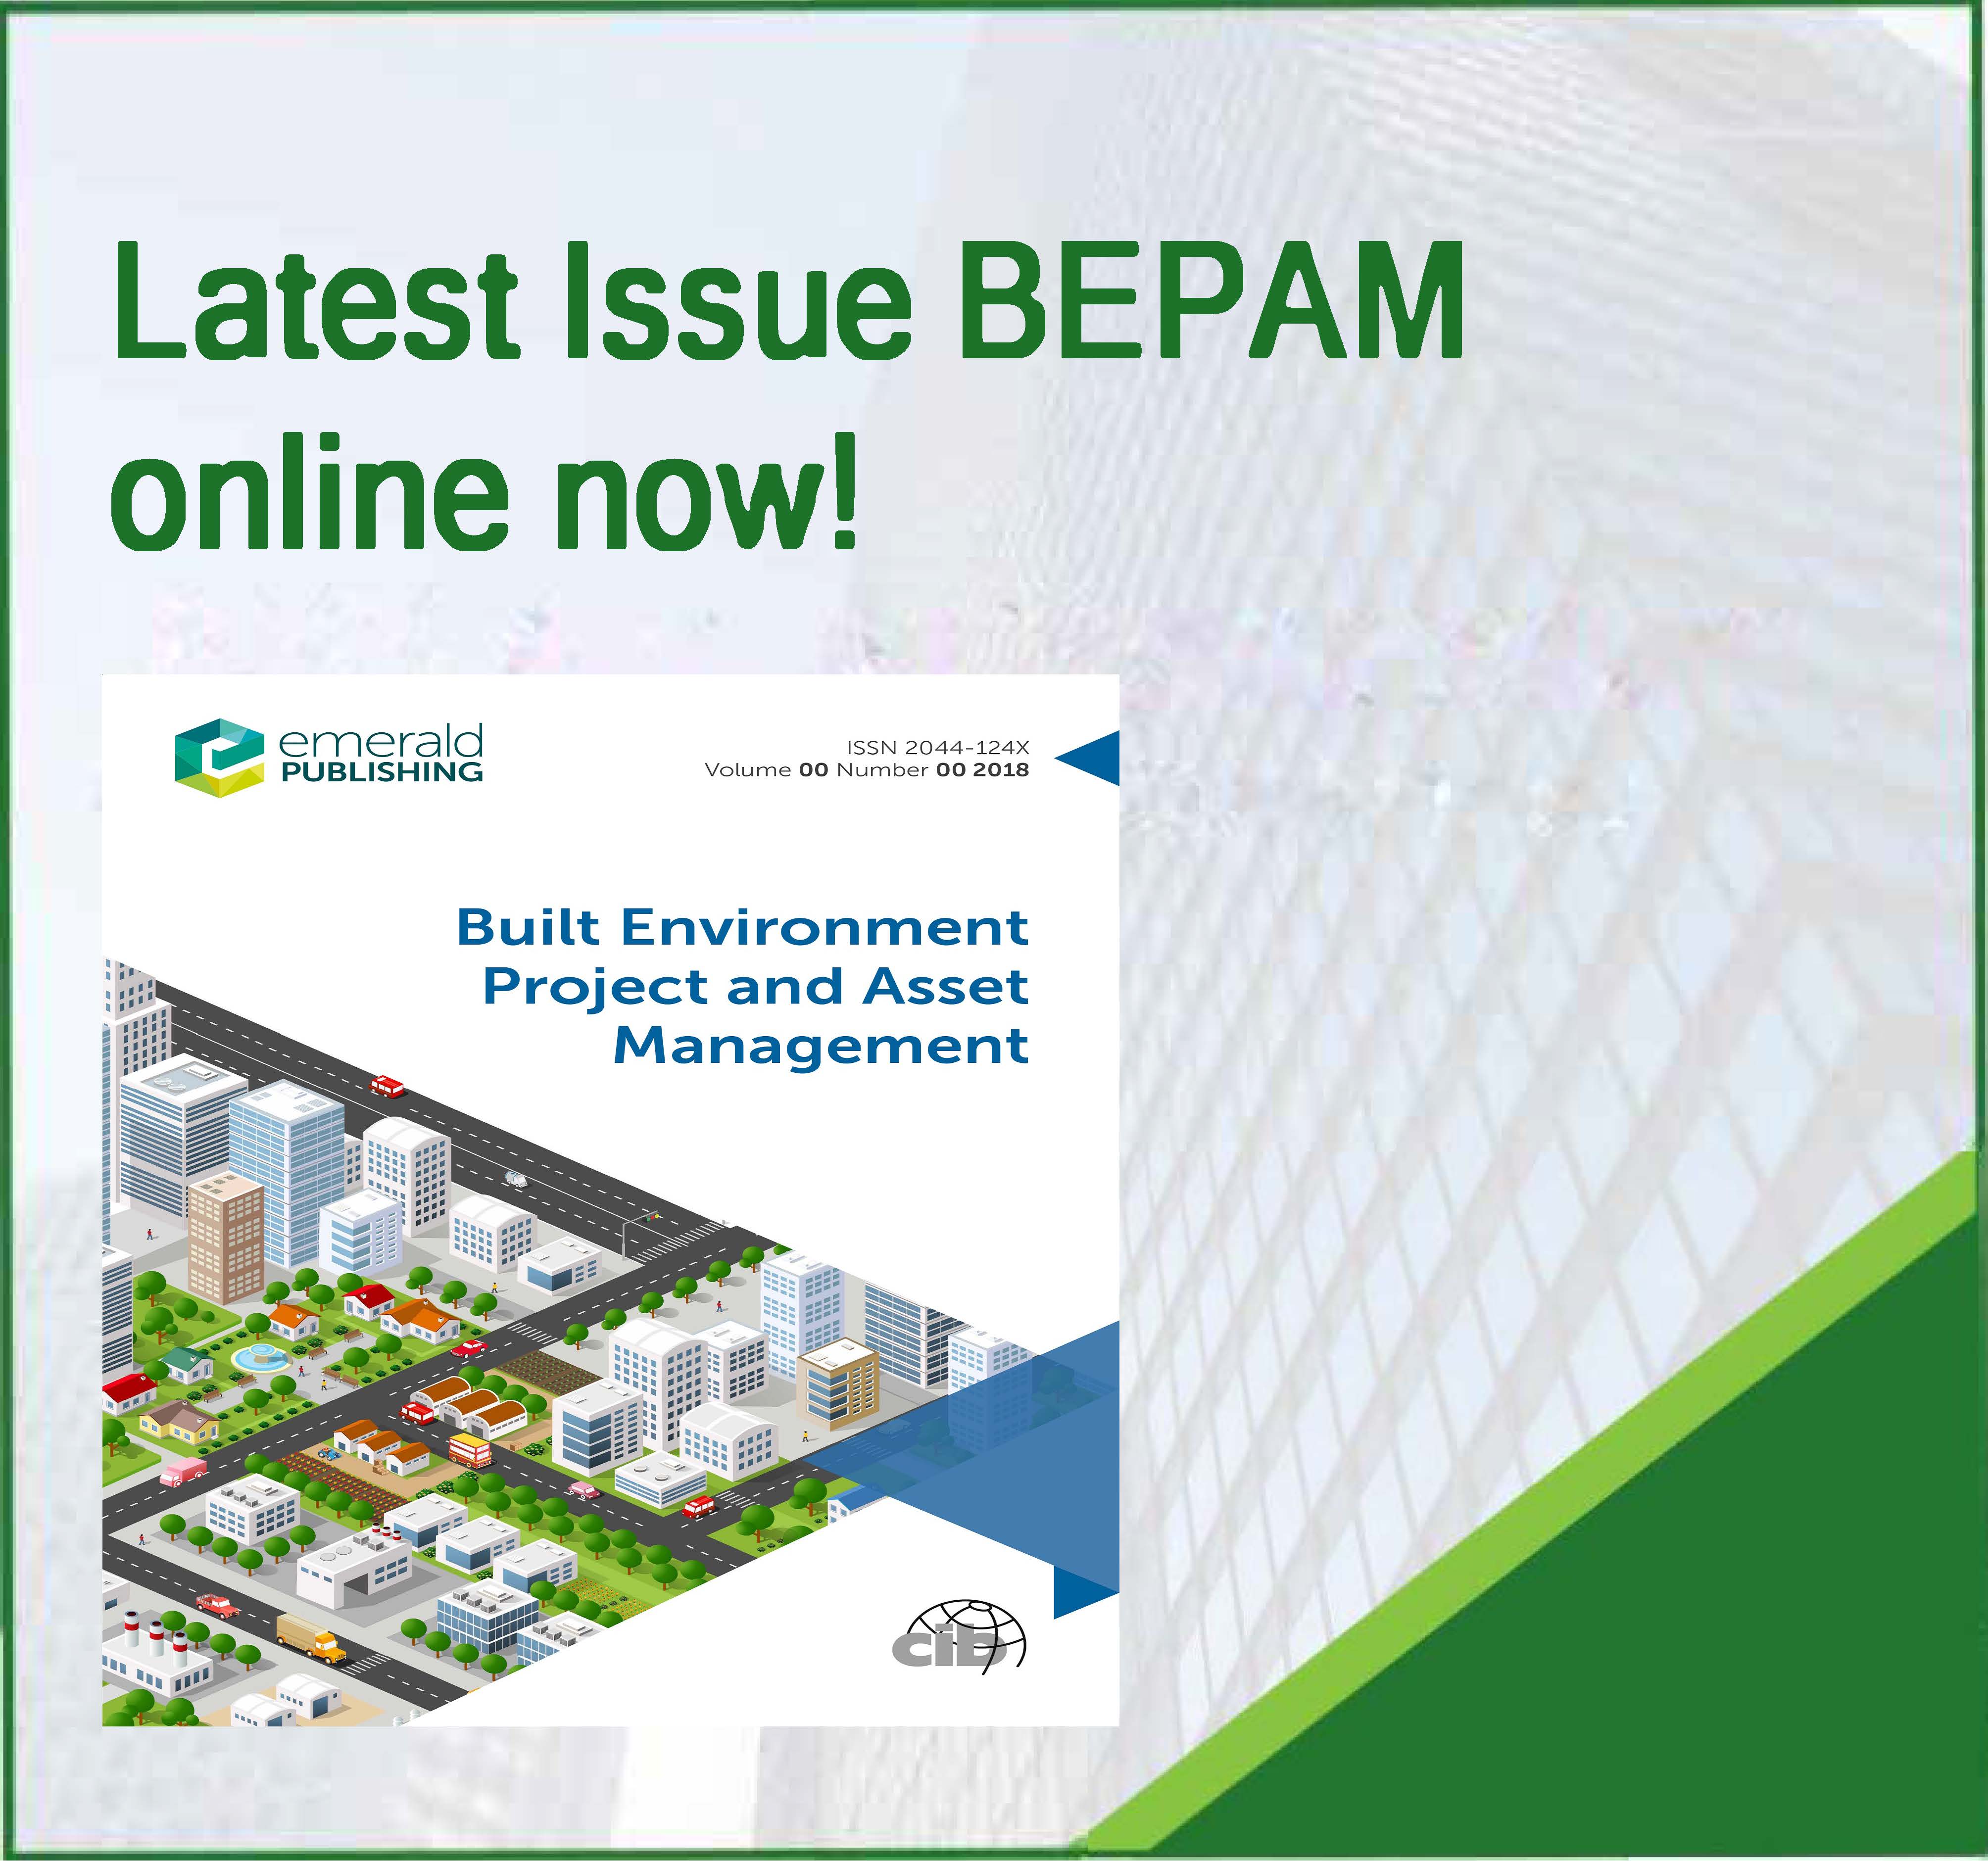 Latest Issue of BEPAM (Built Environment Project and Asset Management) is available online!